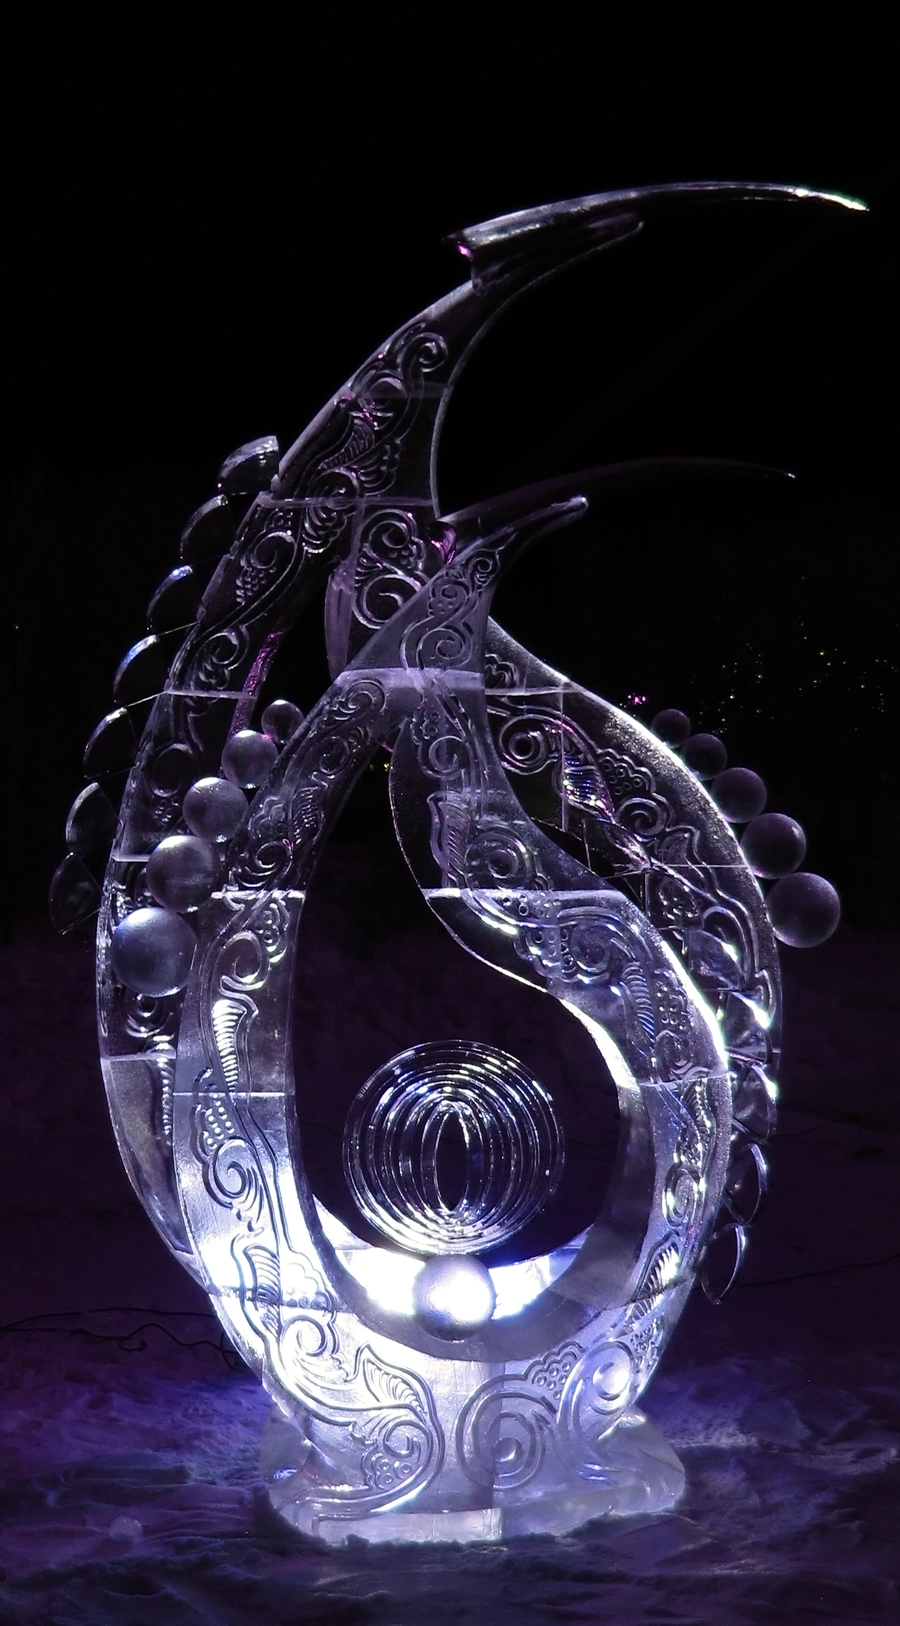 Ice_Scuplture_by_1994aitken1994.png